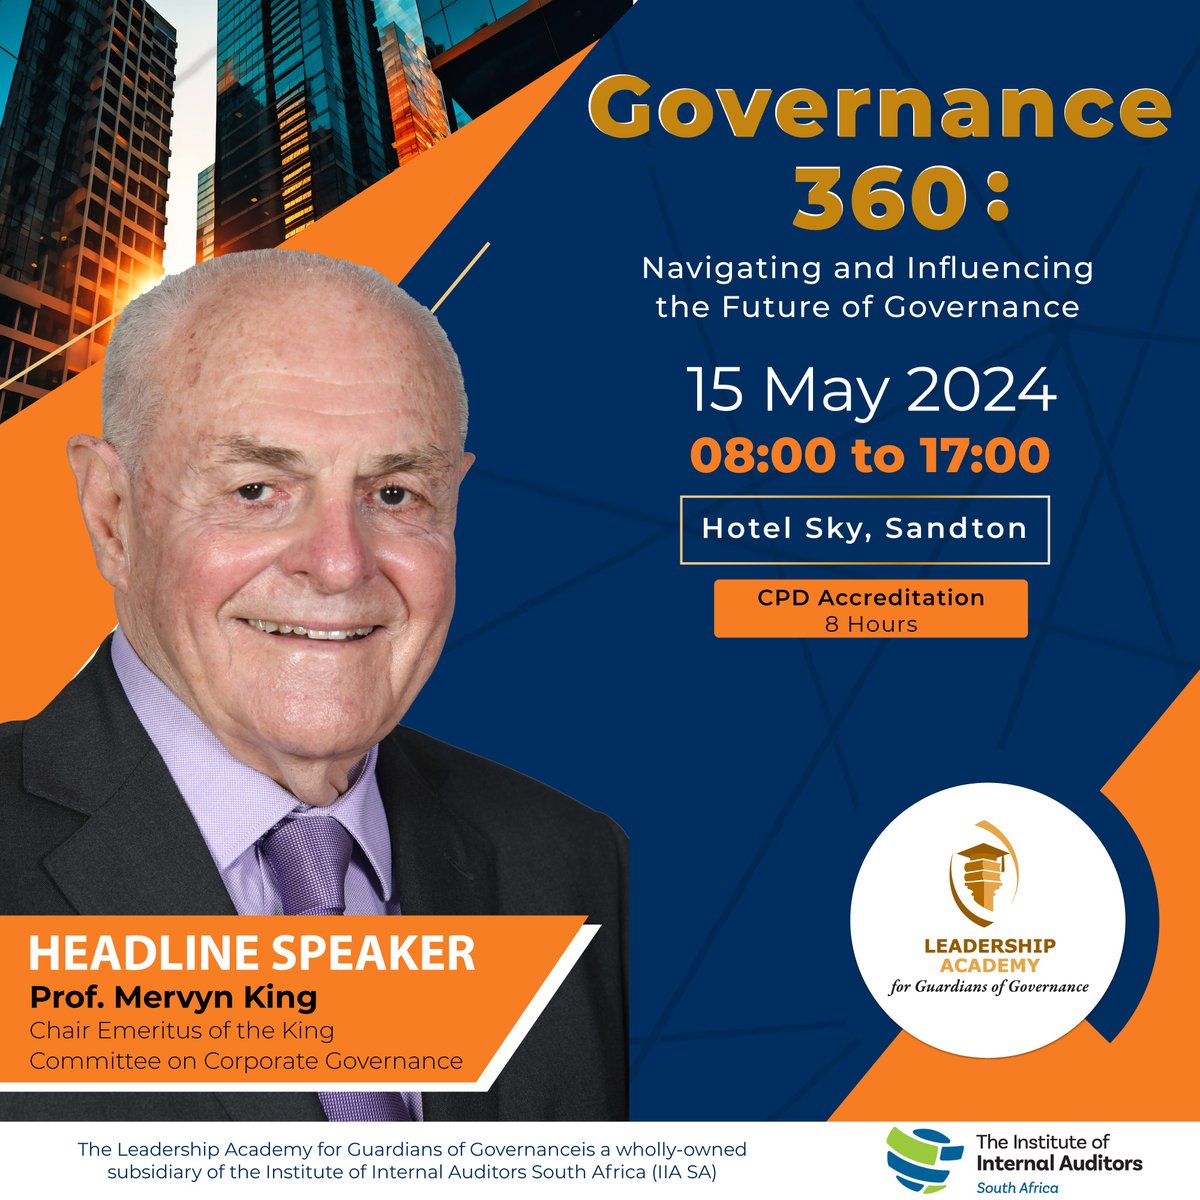 Join us in welcoming Prof. Mervyn King to our ‘Governance 360: Navigating and Influencing the Future of Governance’ Conference! Reserve your spot now: evolve.eventoptions.co.za/register/gover… 

#Governance360 
@IIASOUTHAFRICA